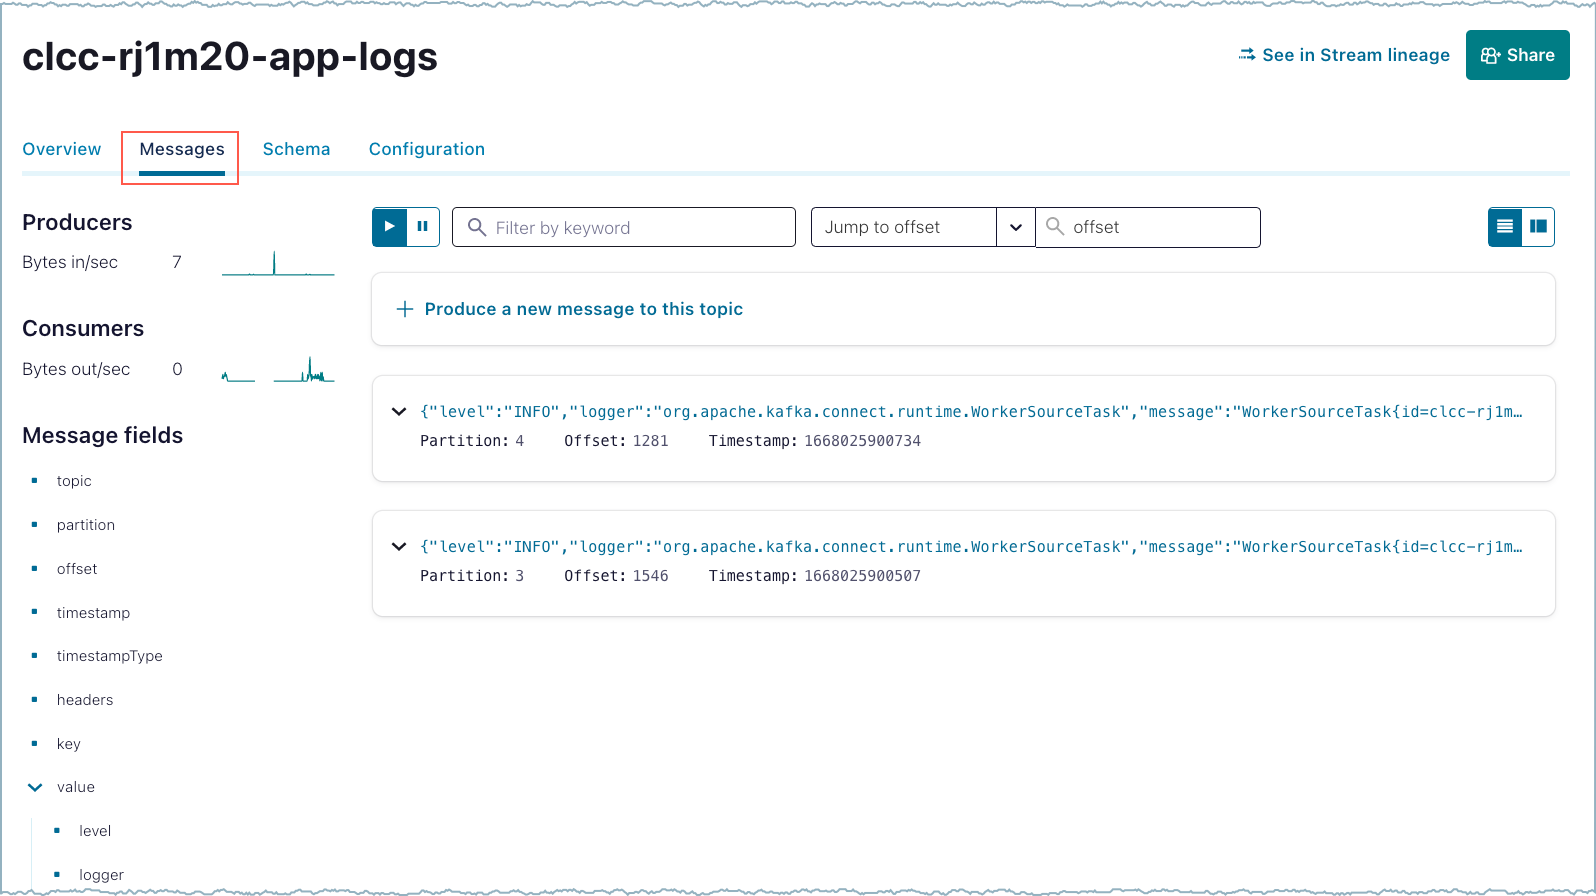 View log topic messages